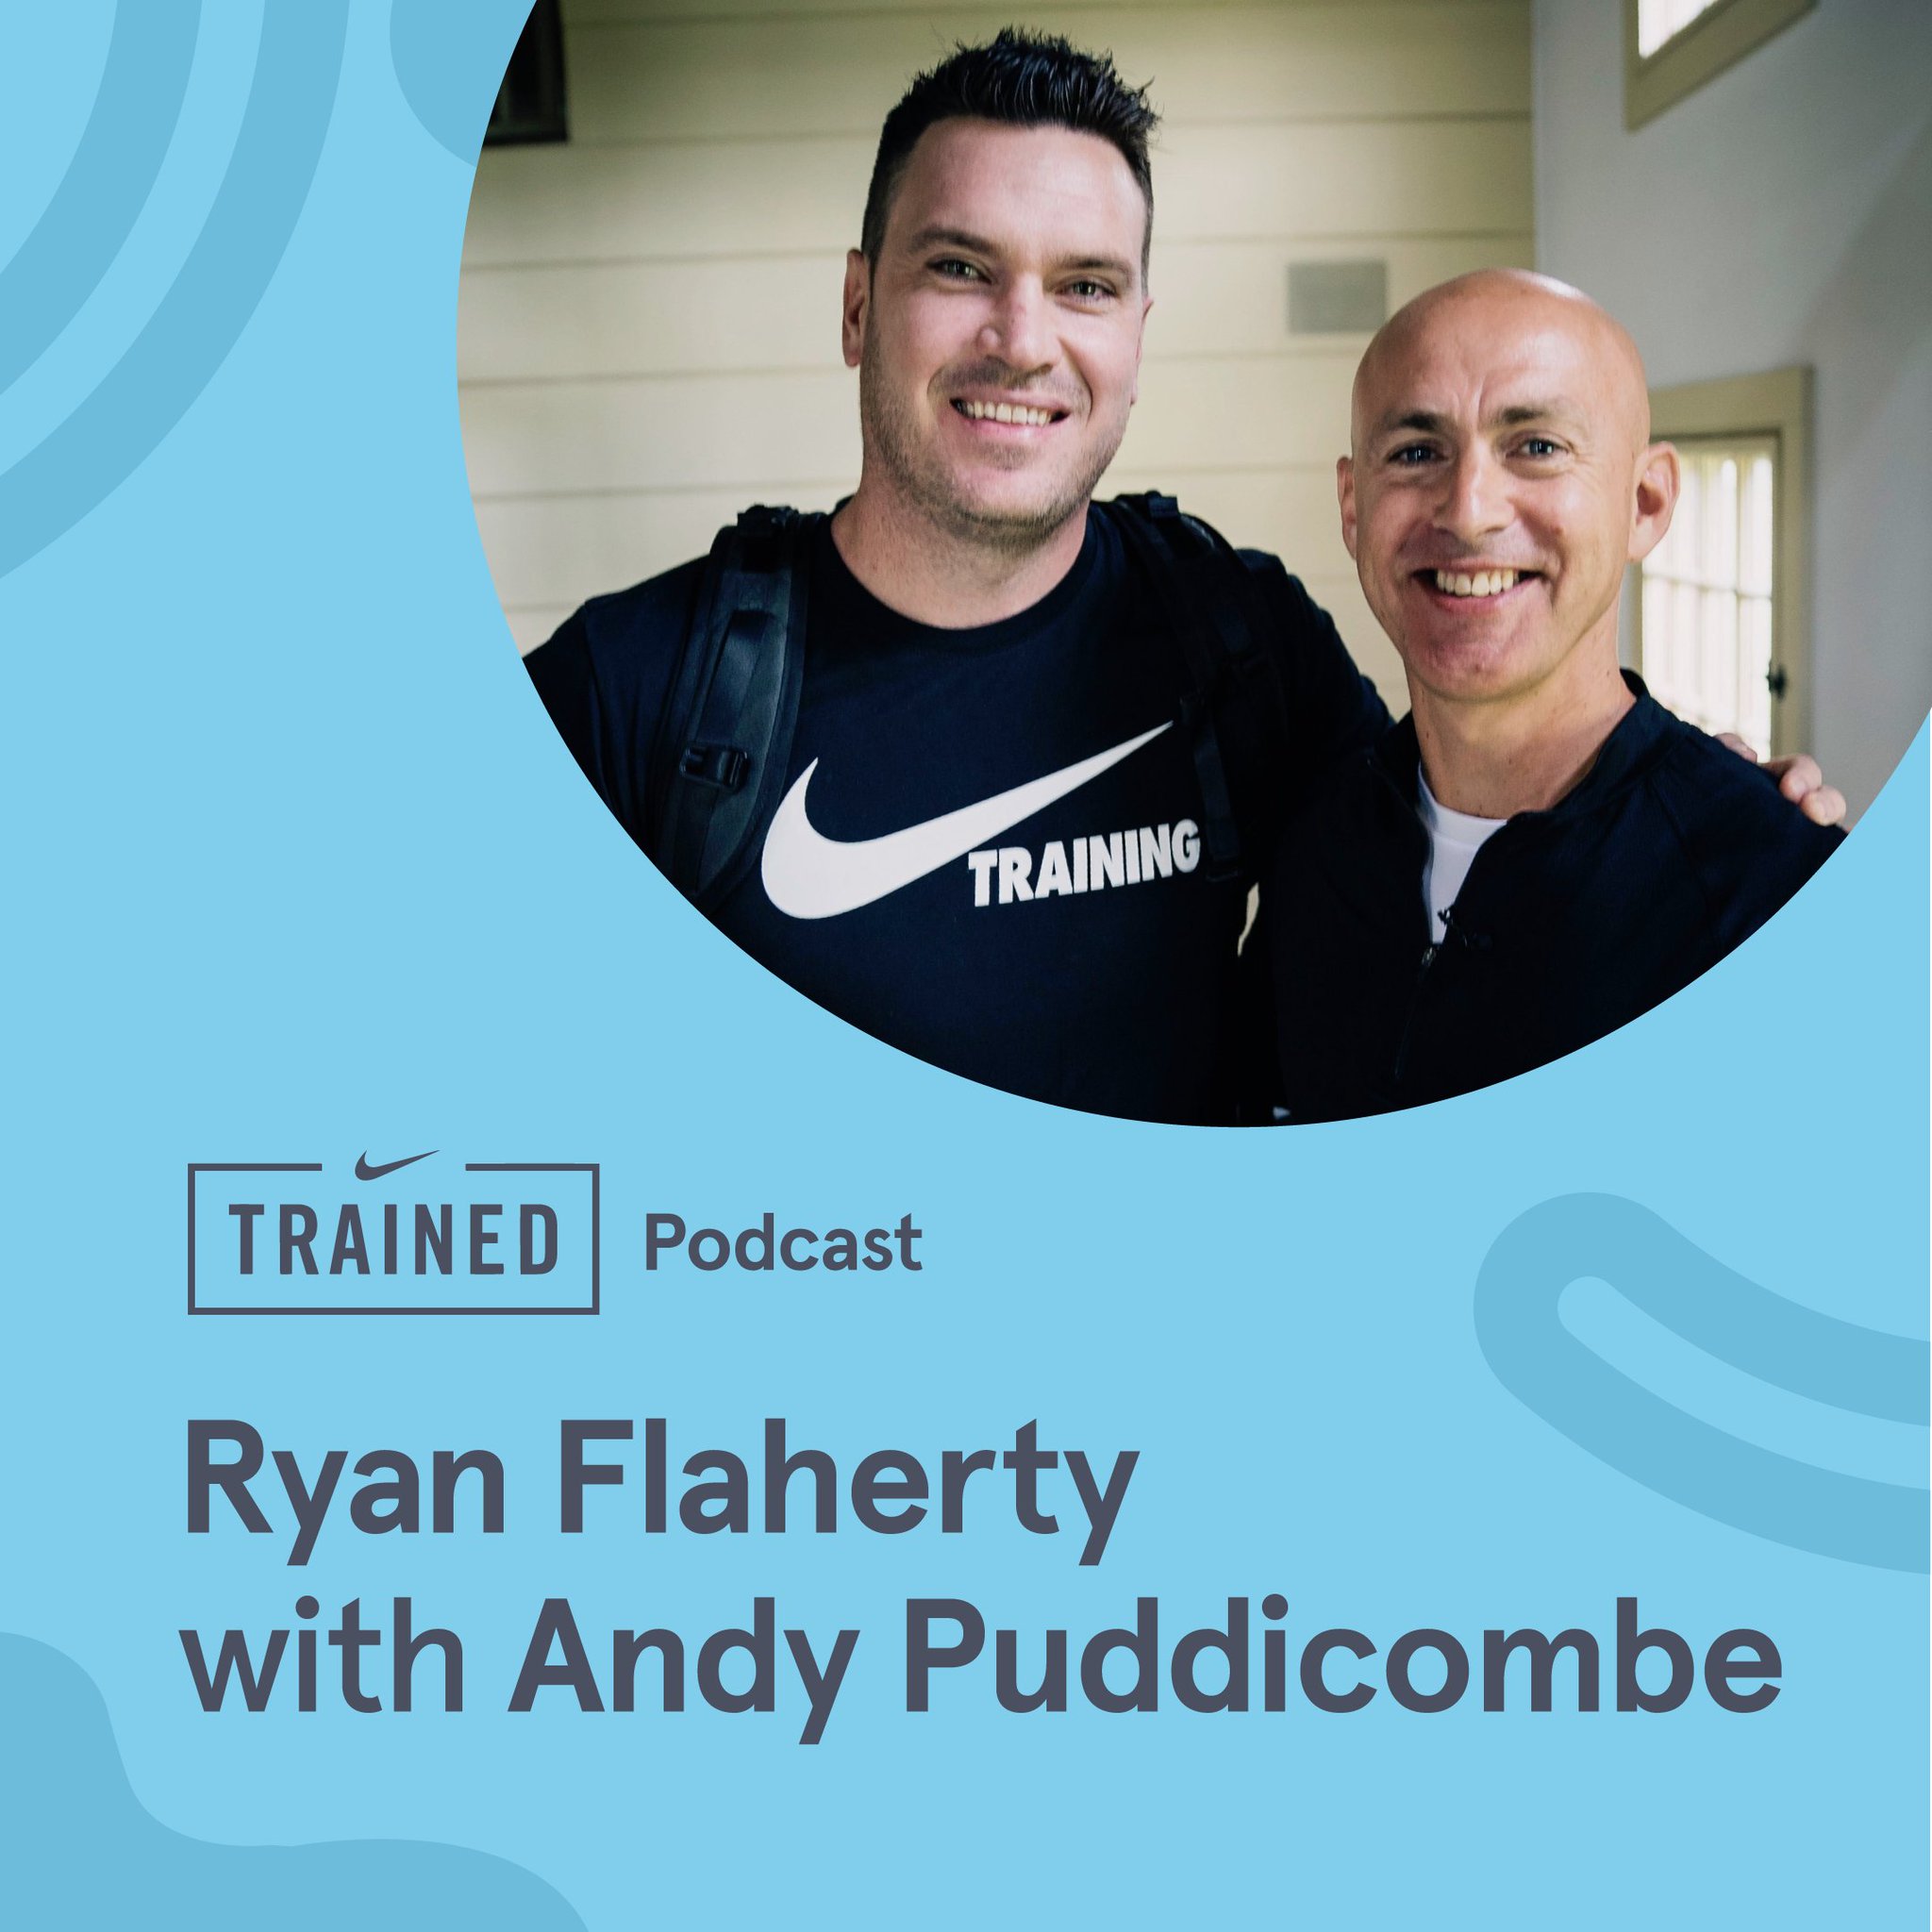 Headspace on Twitter: "For athletes, mindset is everything when it comes to peak performance. In this must-listen episode of @Nike's new podcast, host Ryan Flaherty talks w/@andypuddicombe about the importance of